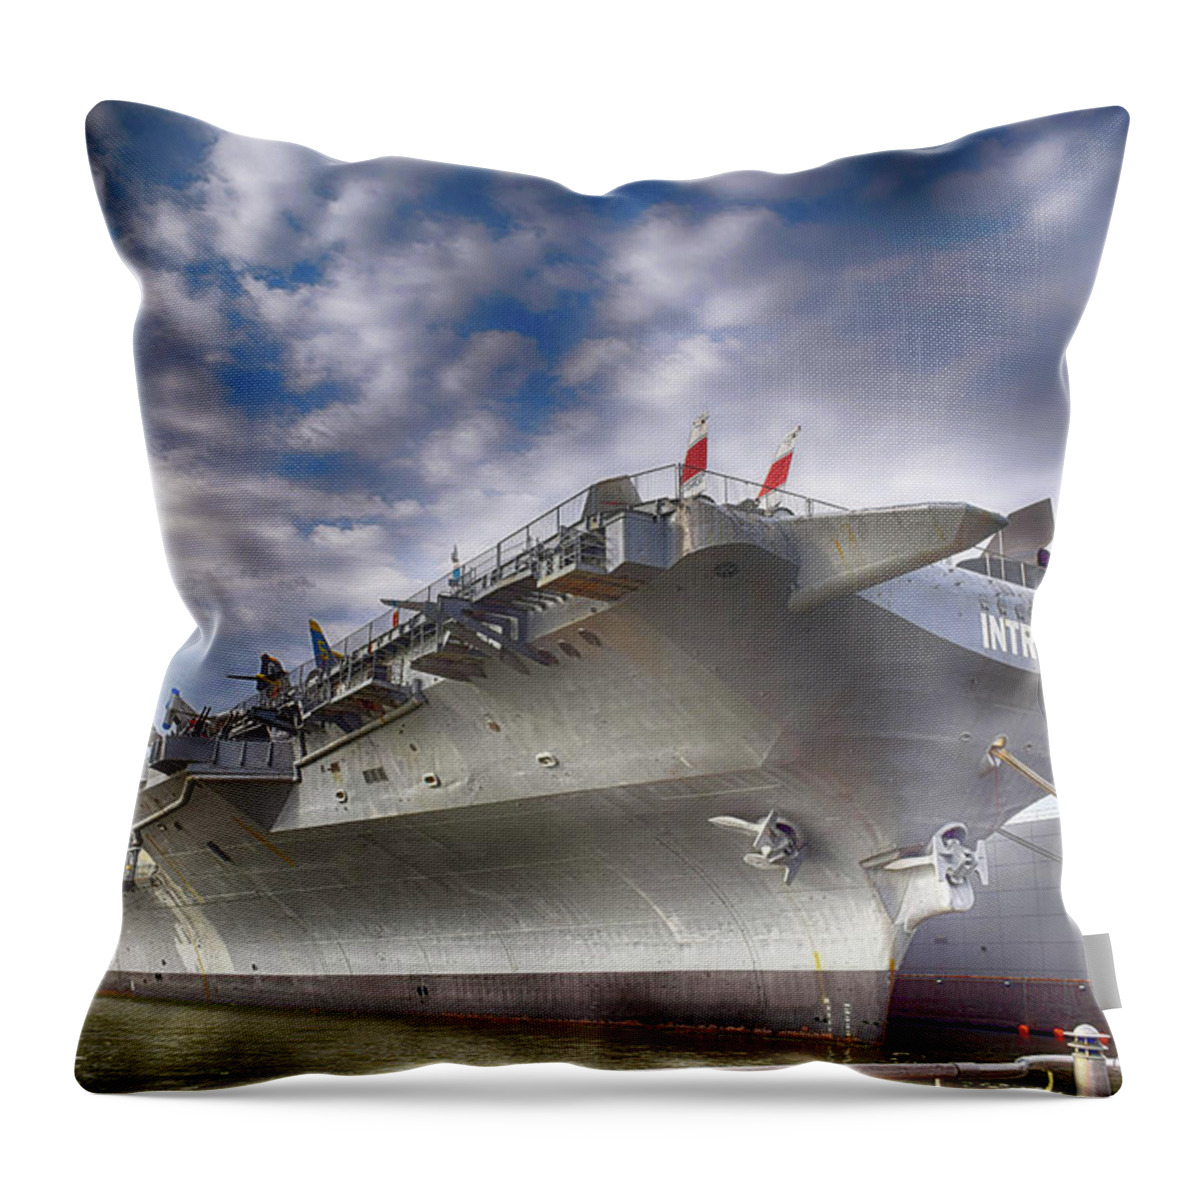 Uss Intrepid Throw Pillow featuring the photograph The U S S Intrepid by Dyle Warren